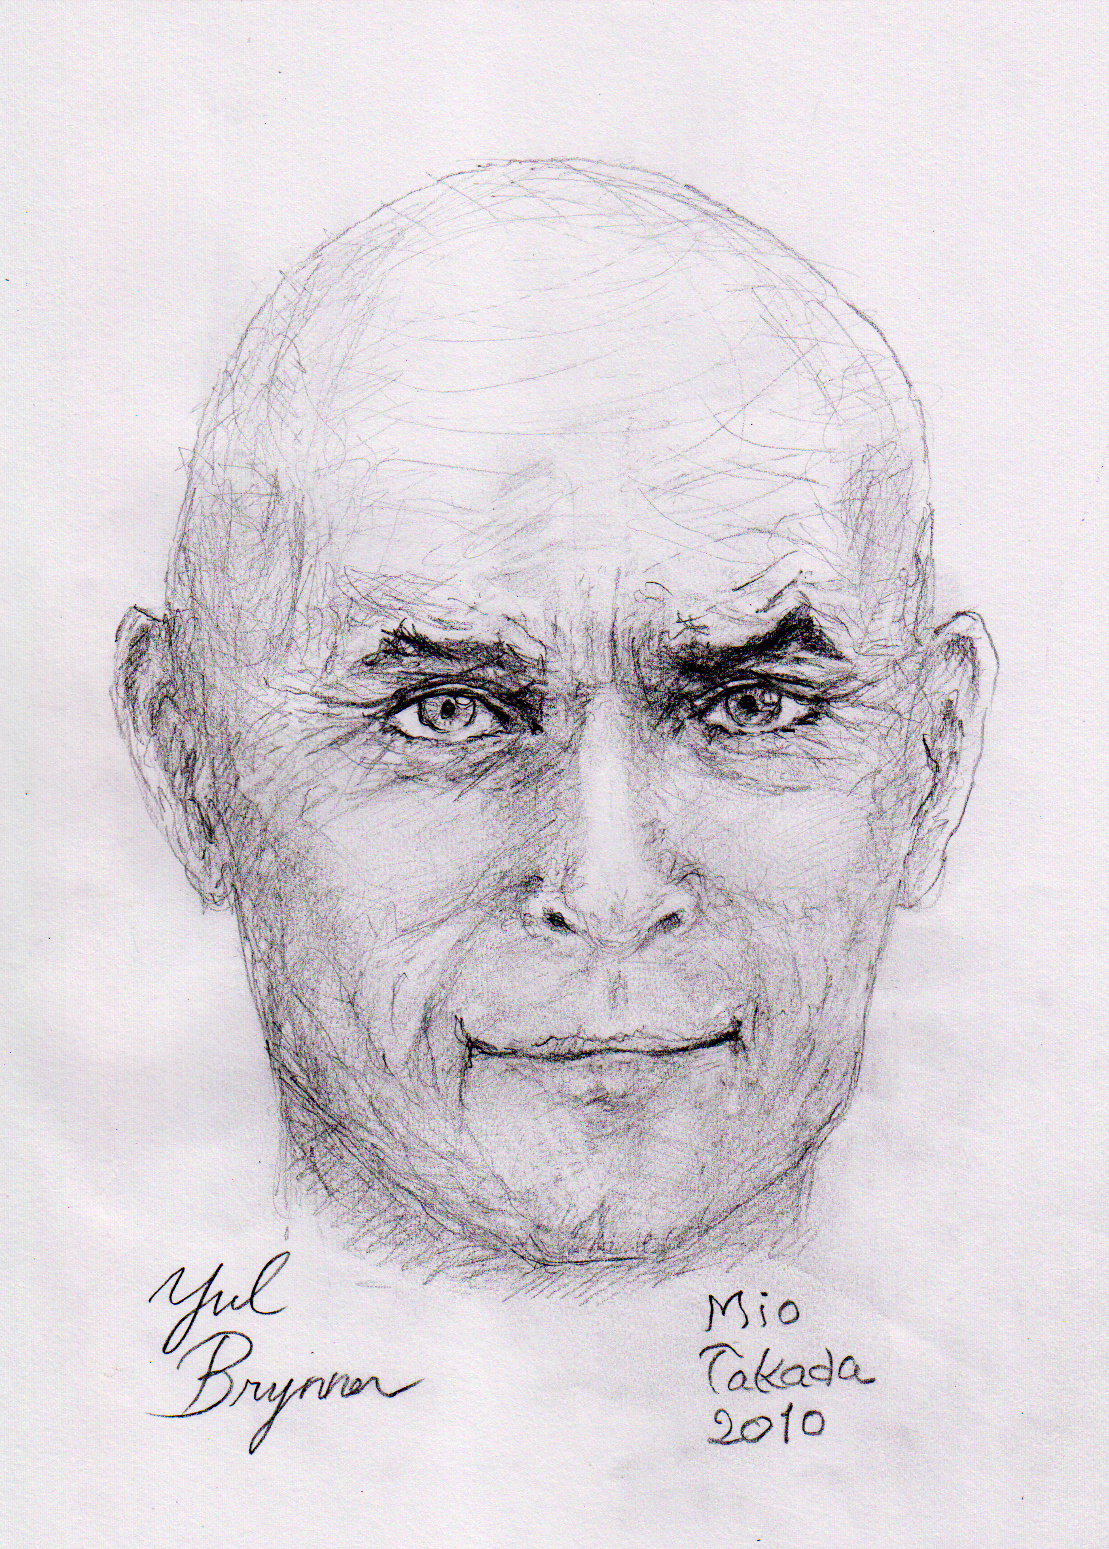 Yul Brynner's quote #3